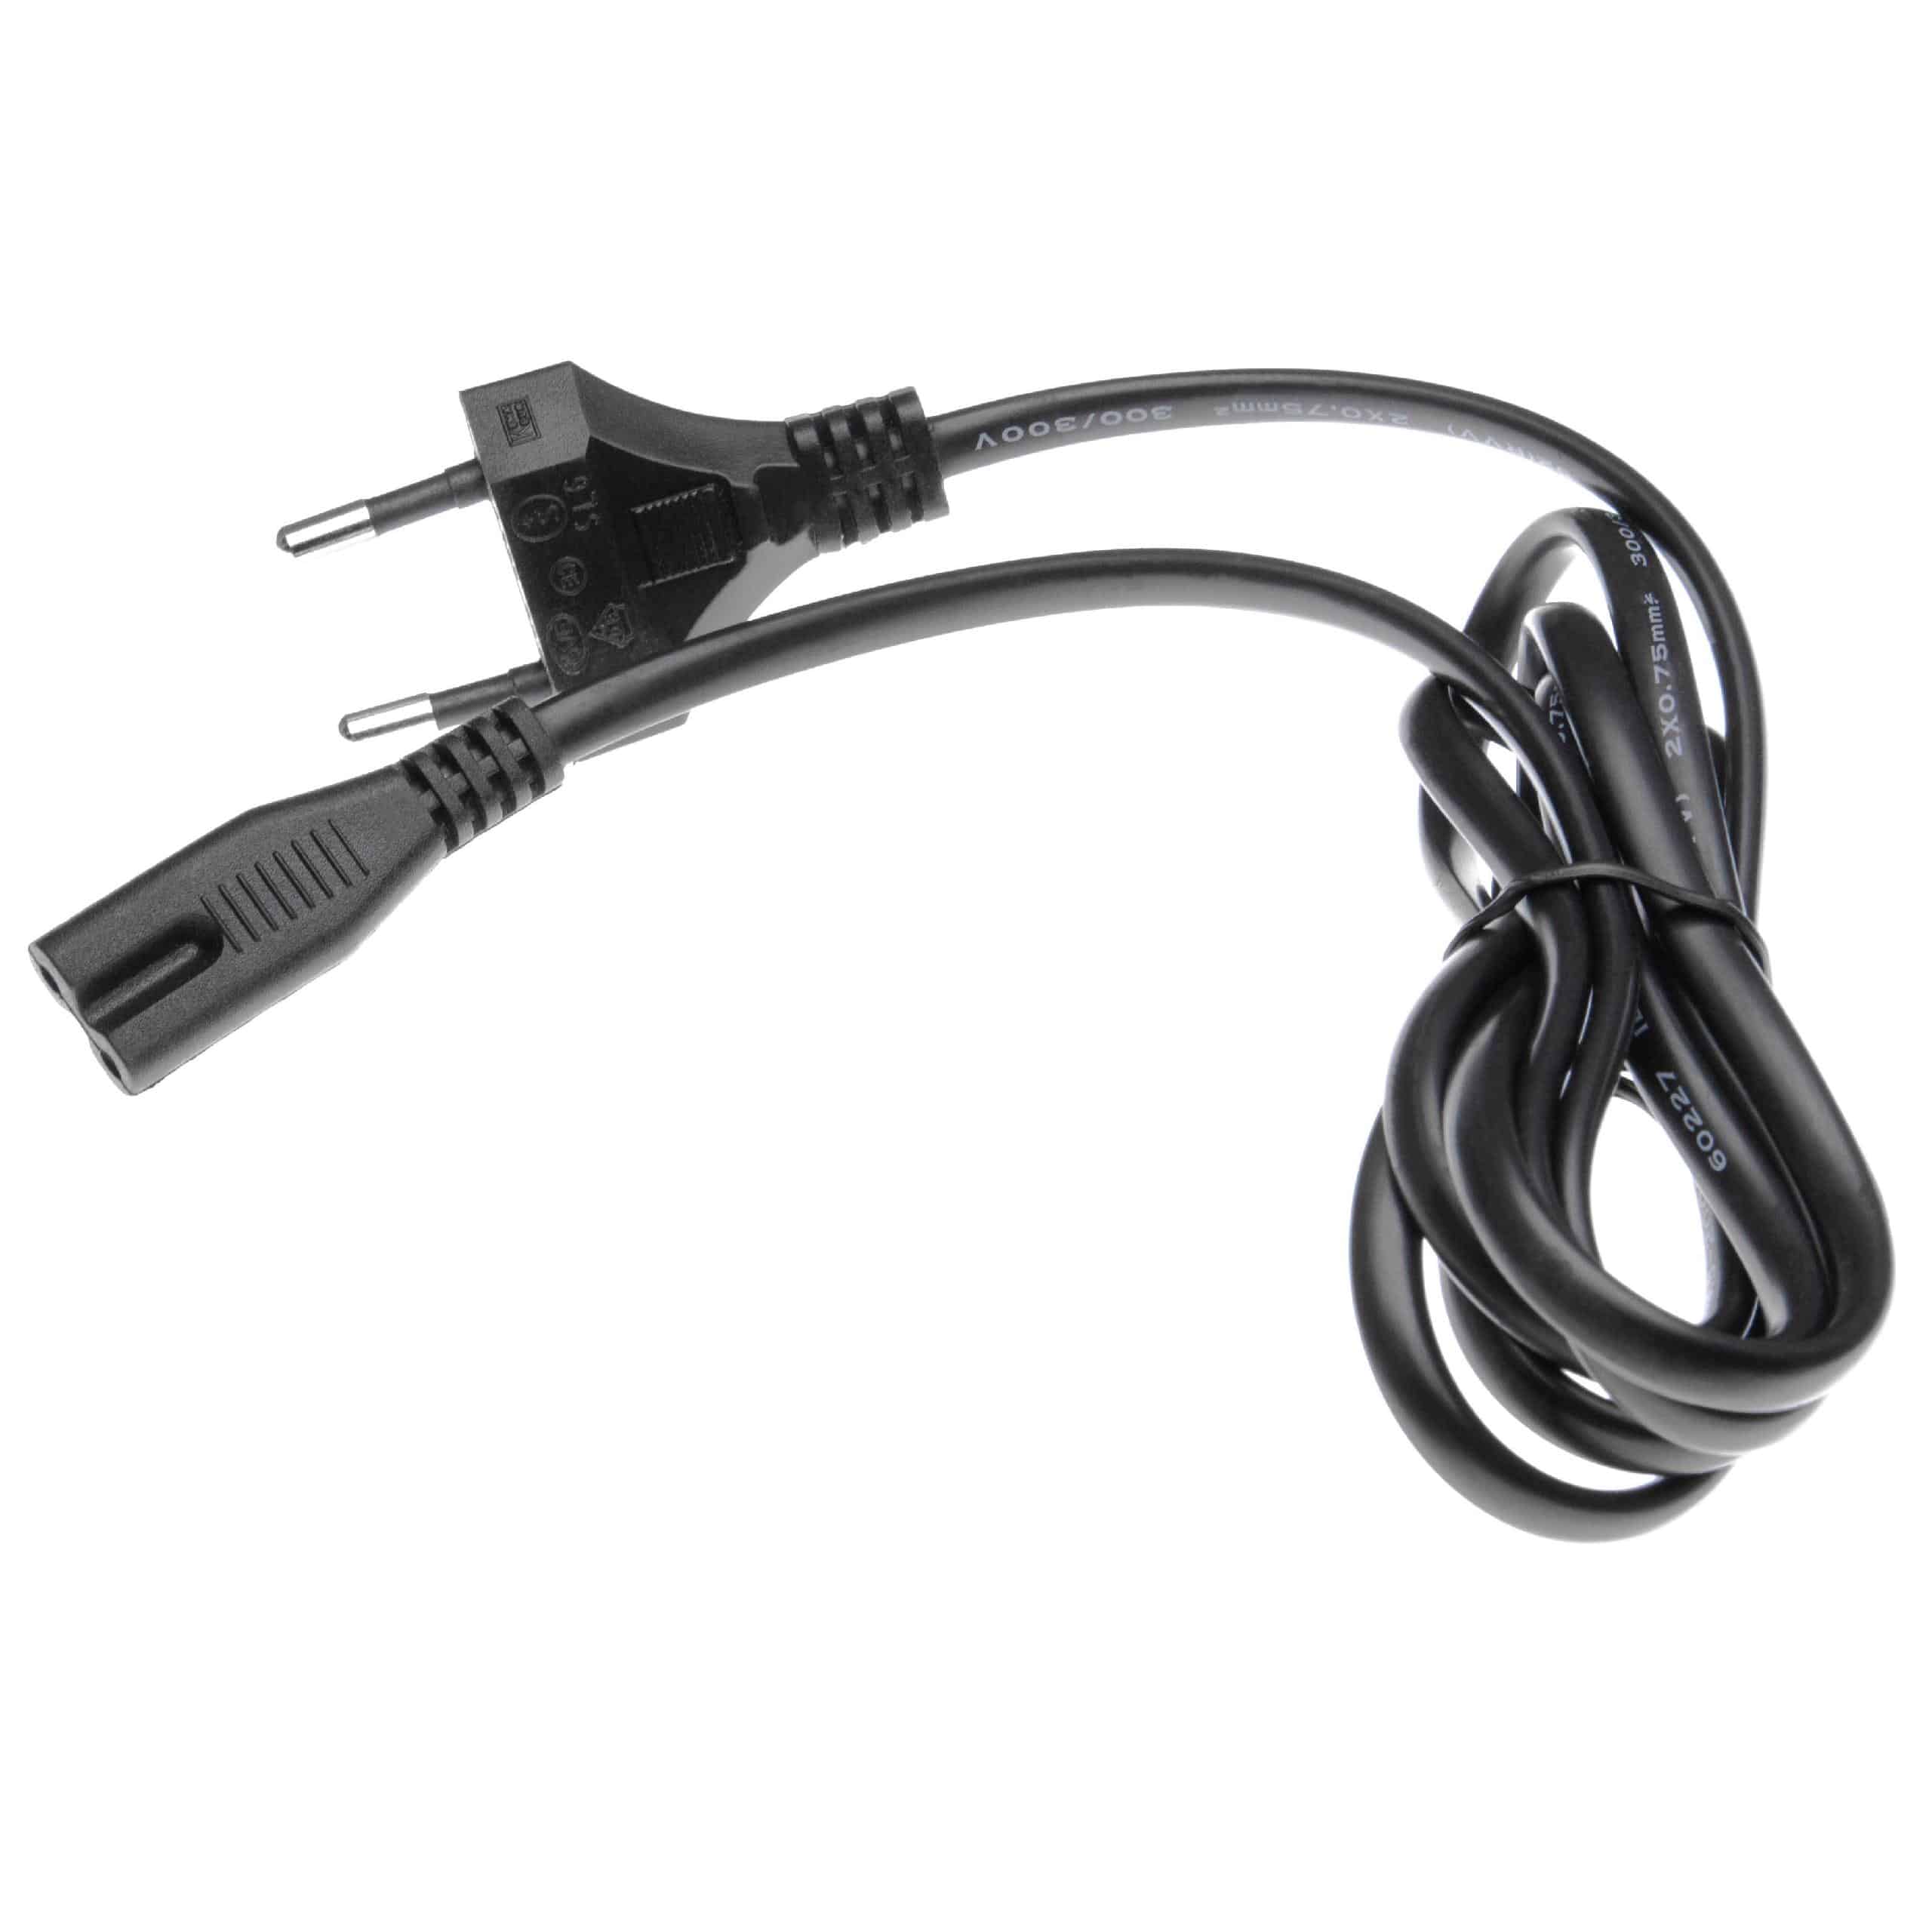 C7 Power Cable Euro Plug suitable for Devices e.g. PC Monitor Computer - 1.2 m